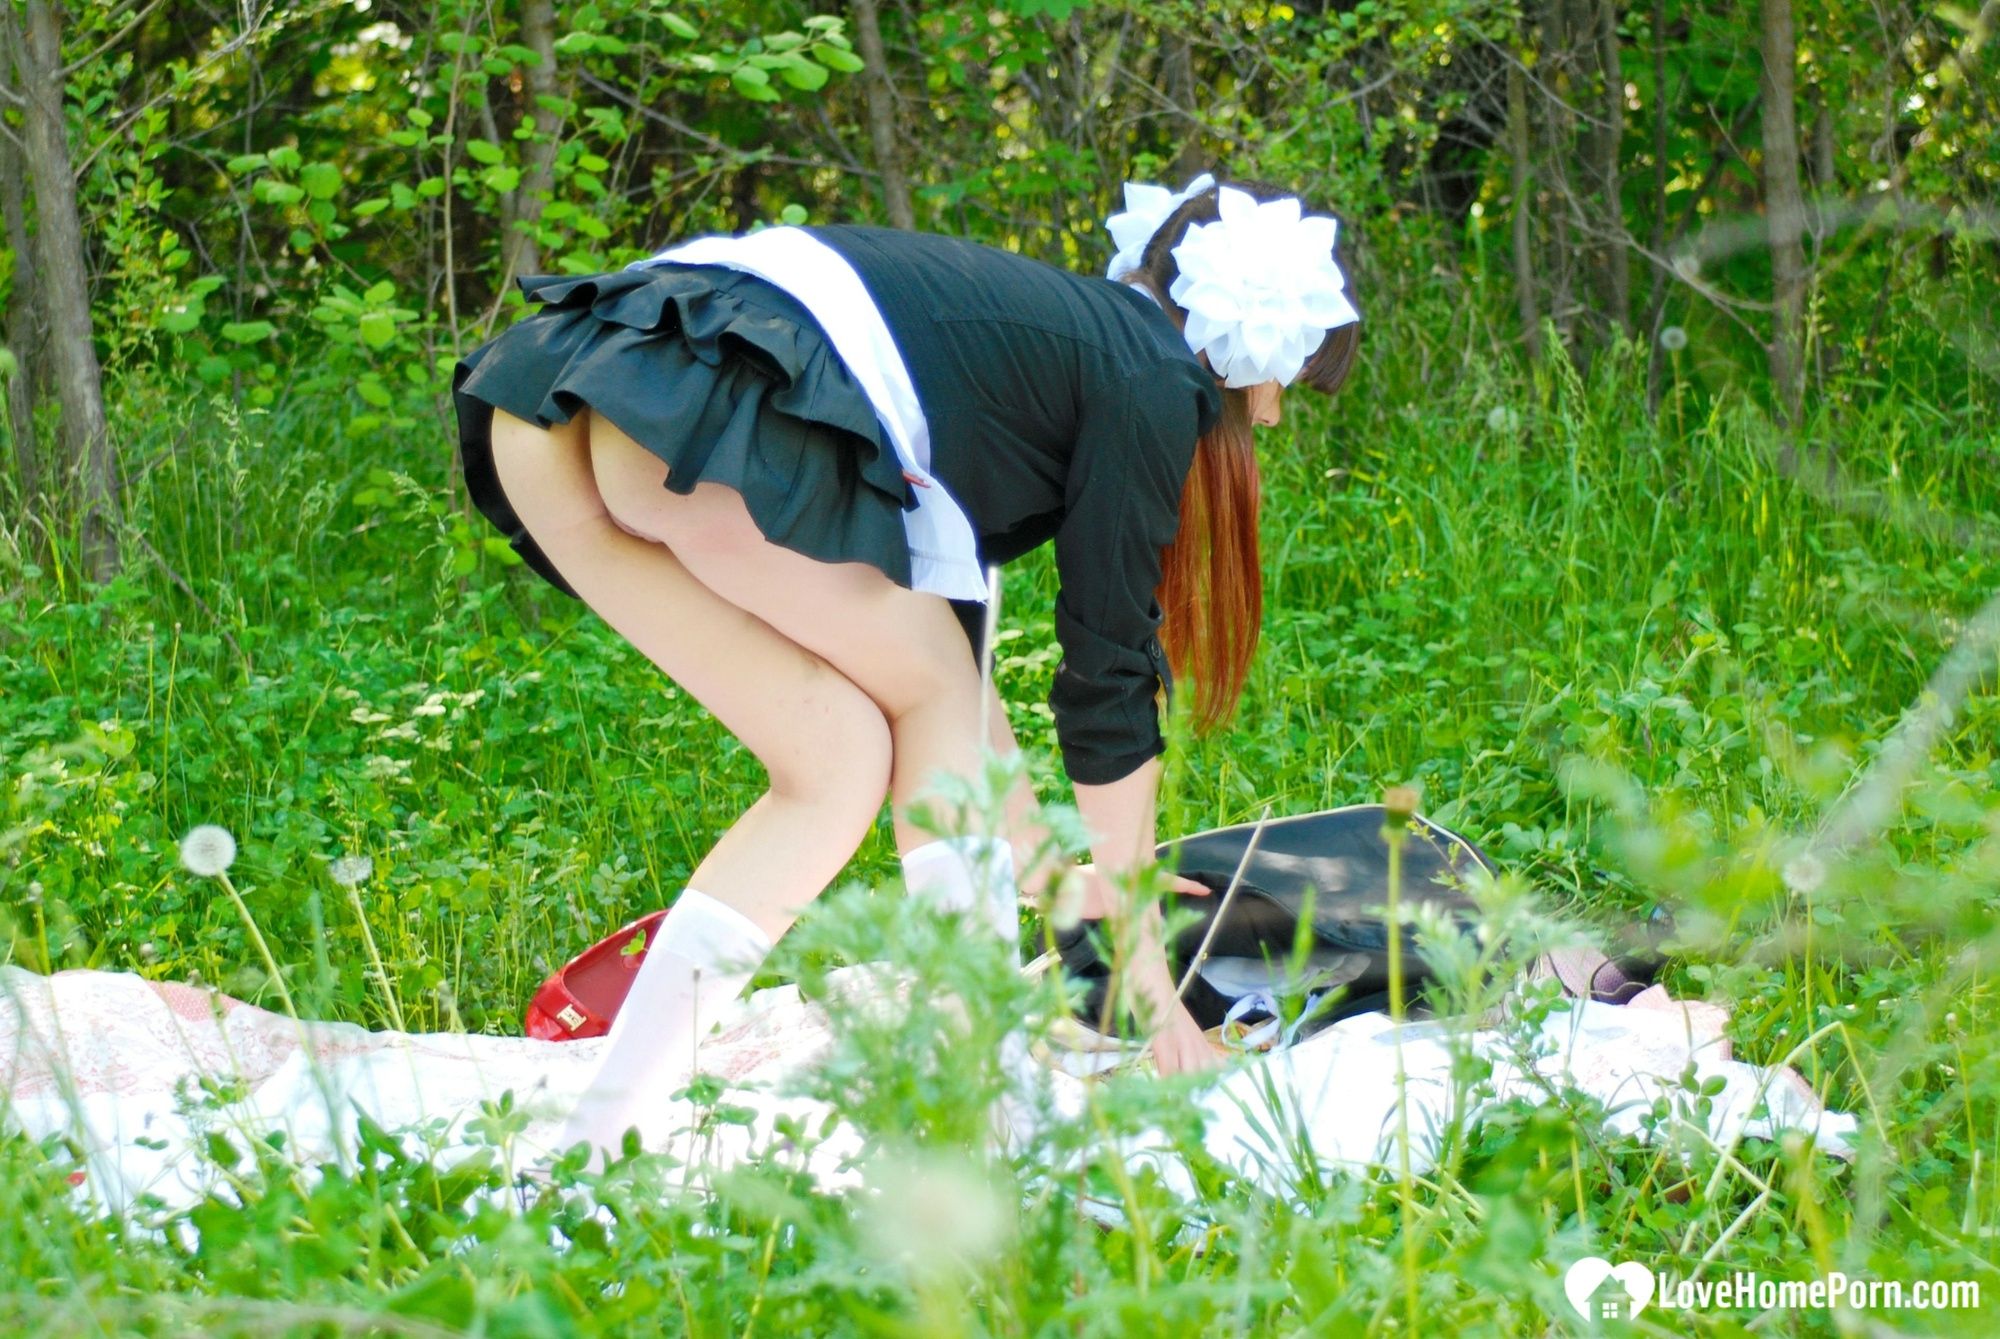 Schoolgirl turns a picnic into a teasing session #13